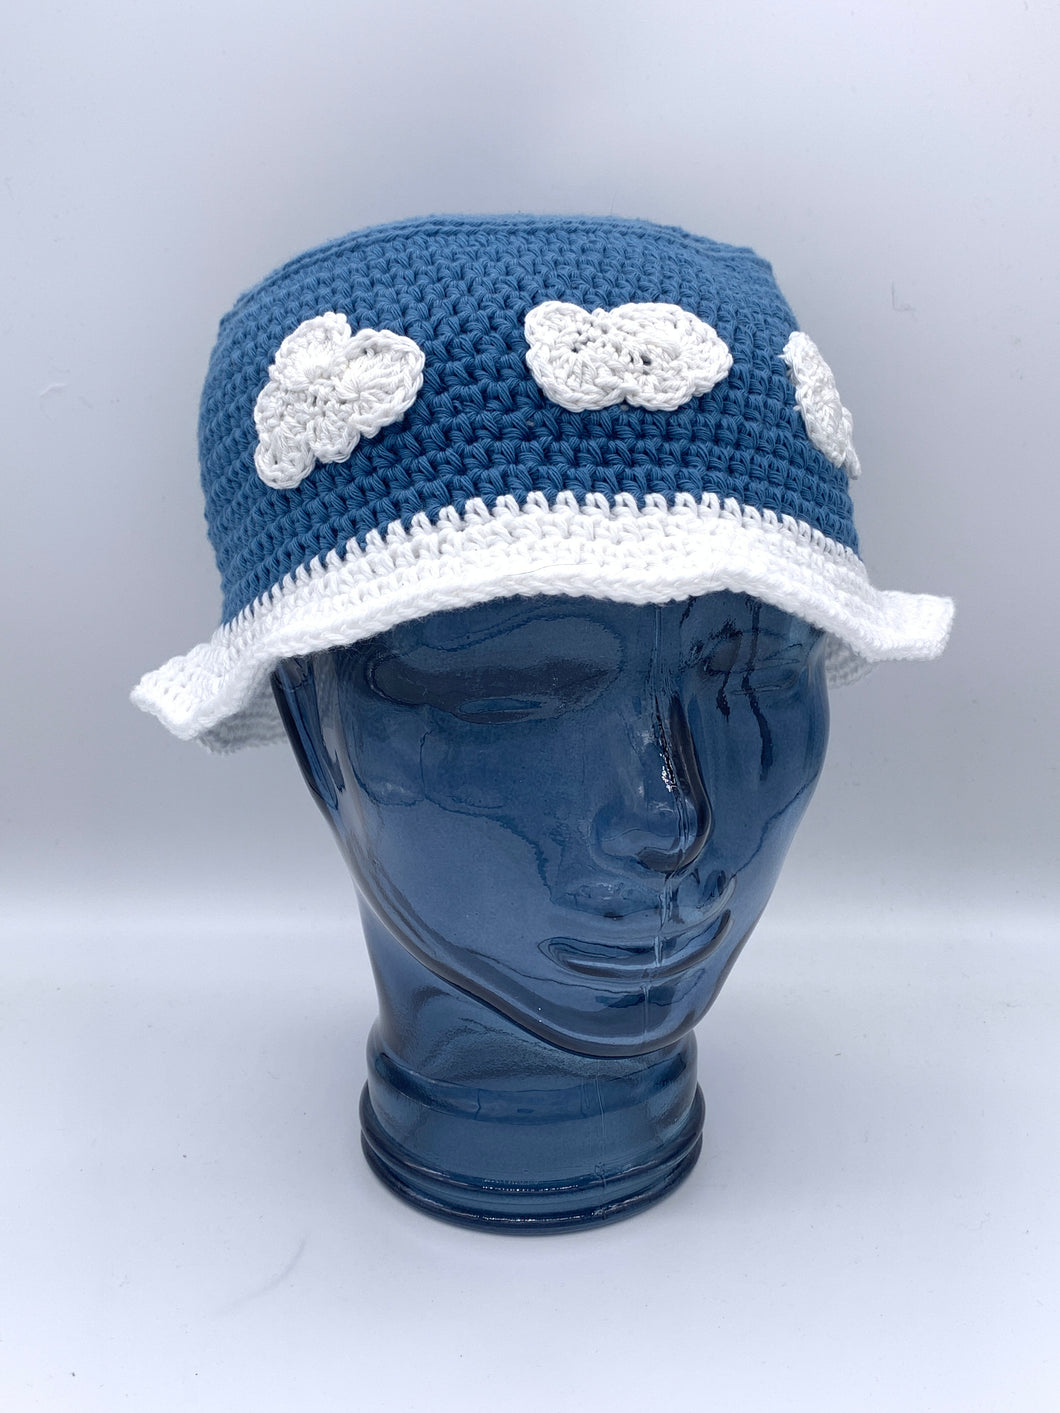 Crochet blue bucket hat with clouds - Size M Teen/ Adult